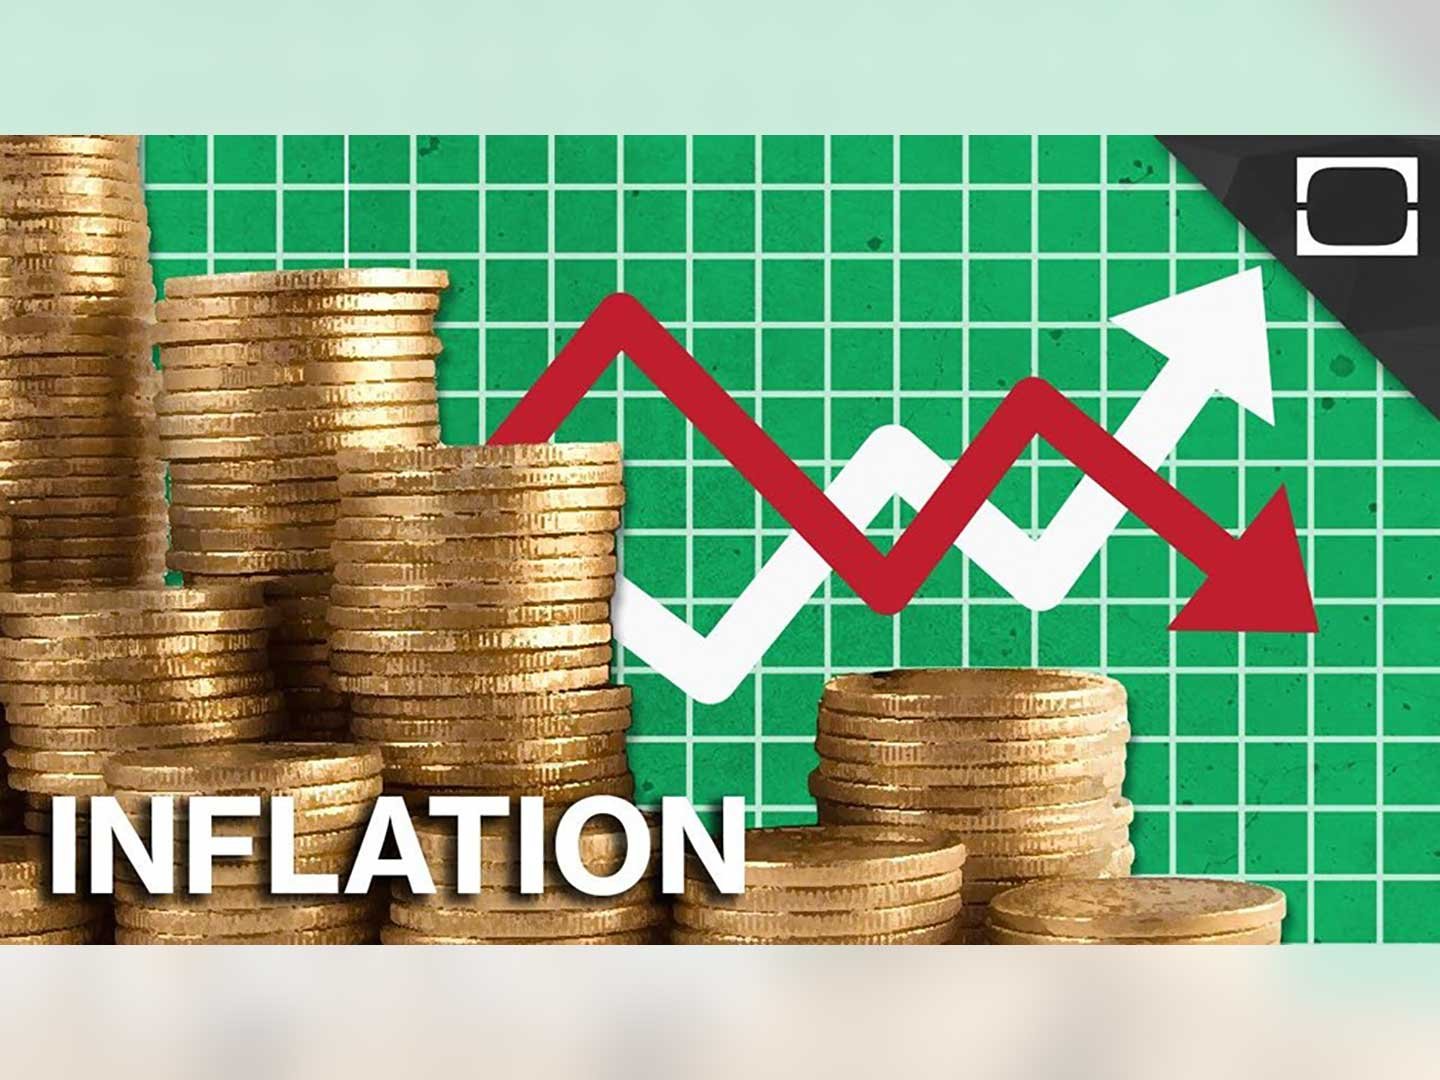 What are the cause of inflation